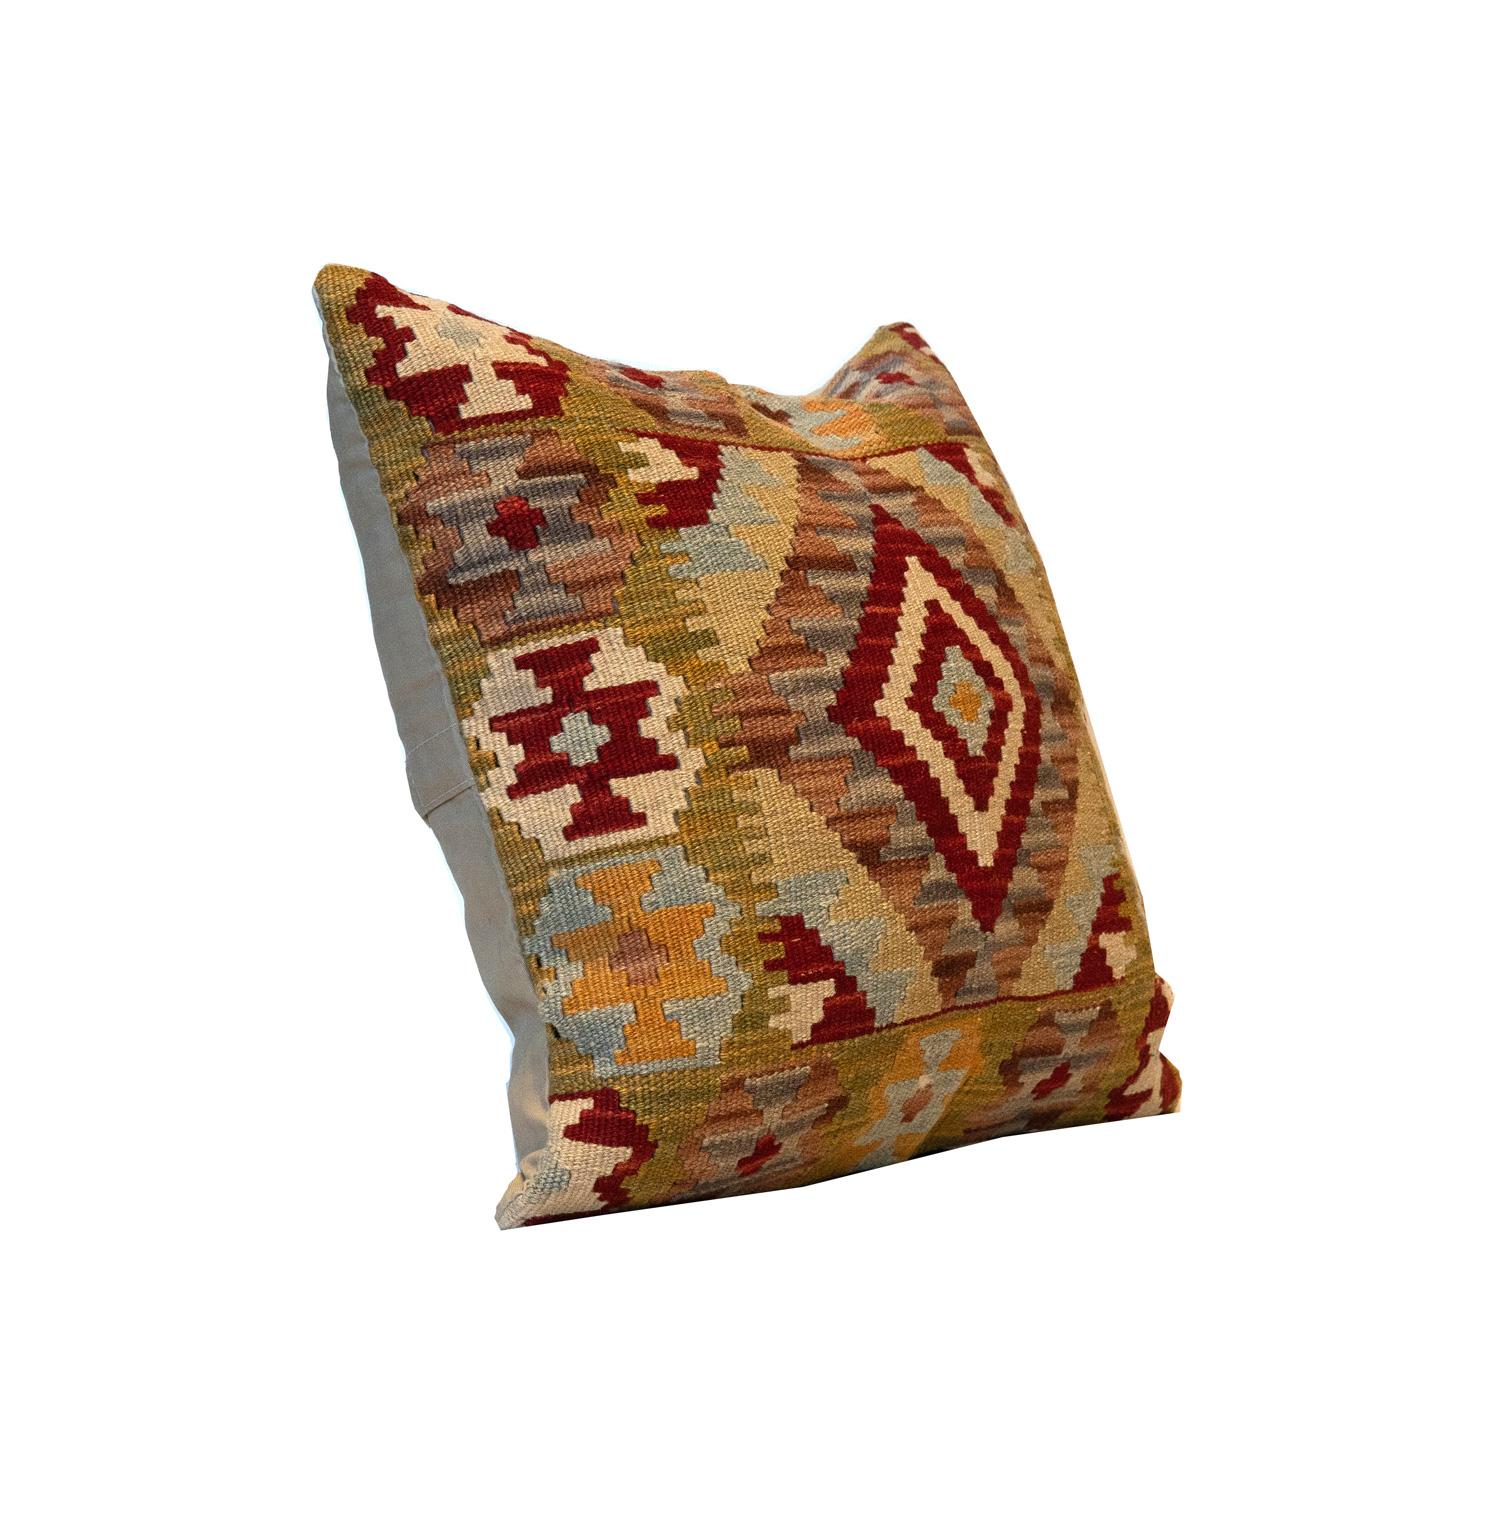 This traditional Kilim cushion cover has been handwoven with the traditional Kilim, flat-weave technique. featuring a geometric pattern woven in beige, cream, blue and red. Decorate your bed, sofa or armchair with this fantastic piece as a scatter